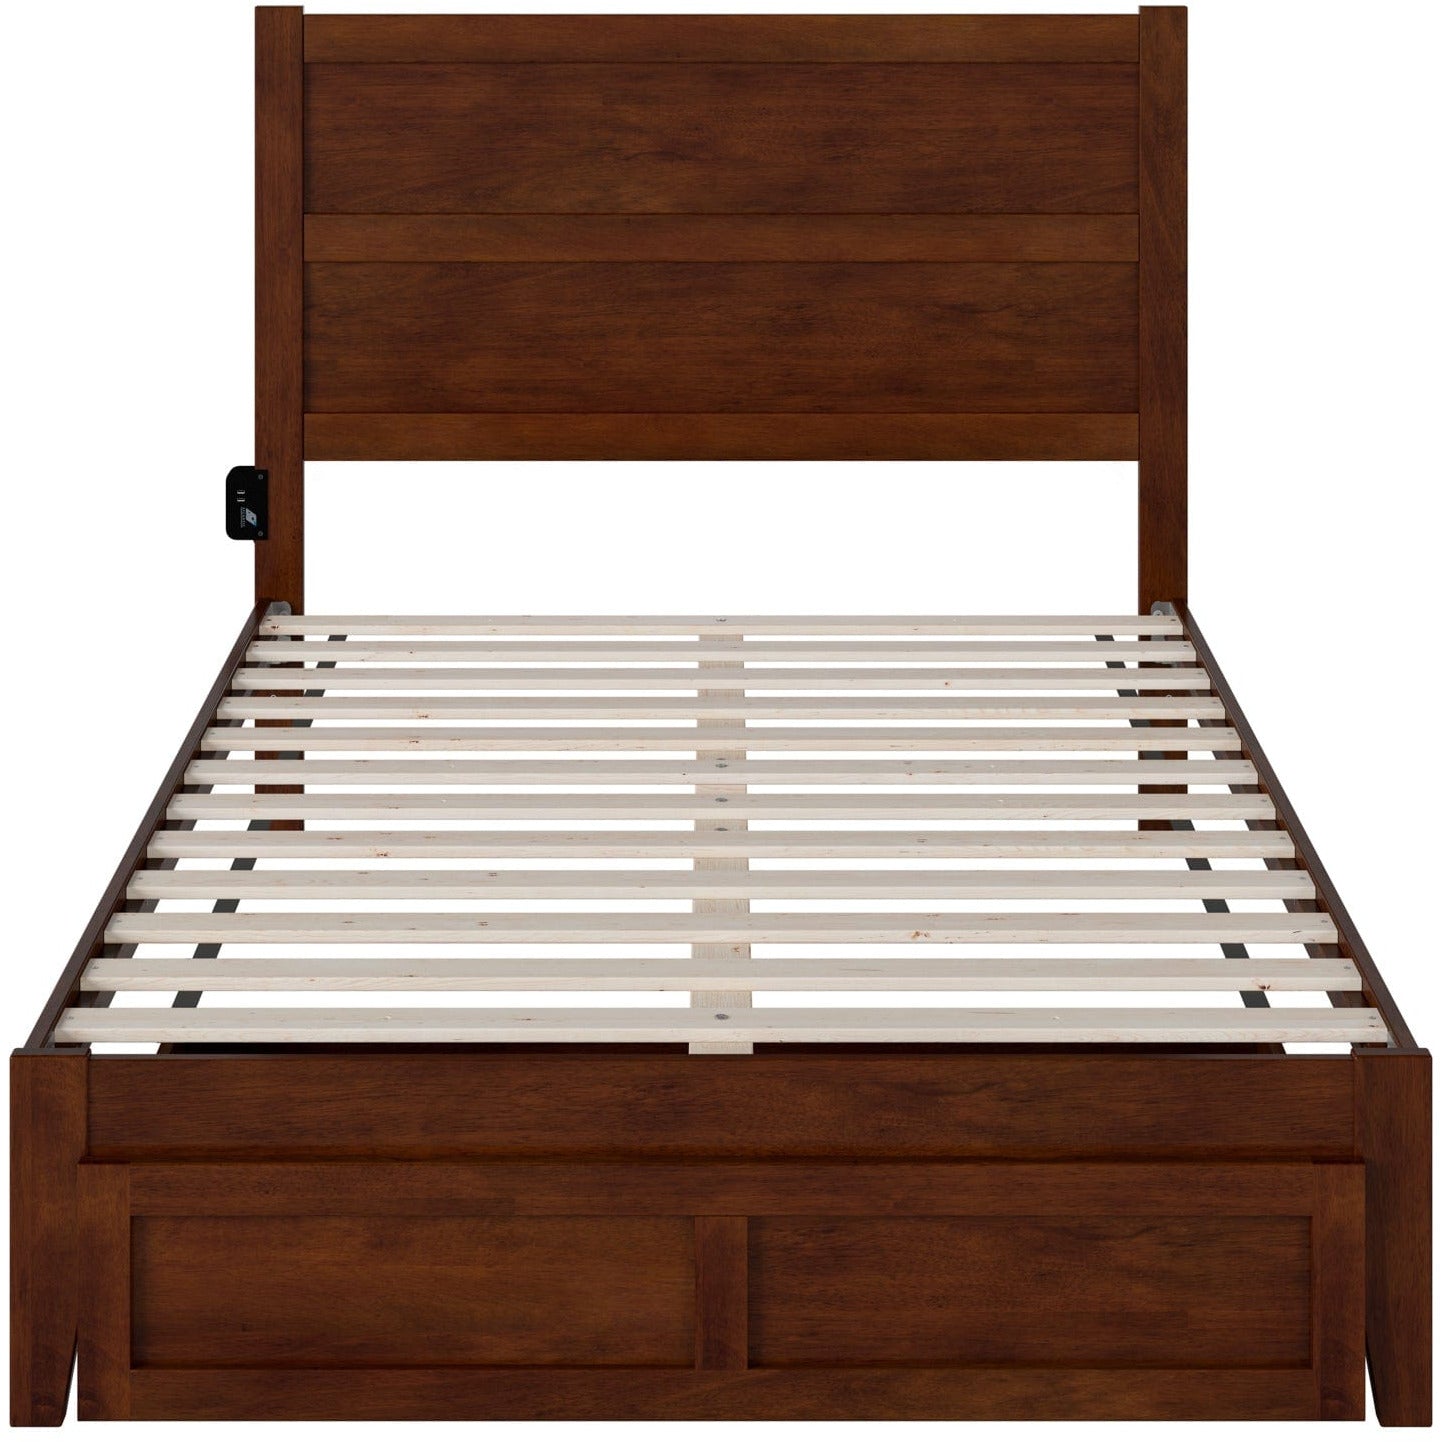 AFI Furnishings NoHo Full Bed with Foot Drawer in Walnut AG9112334